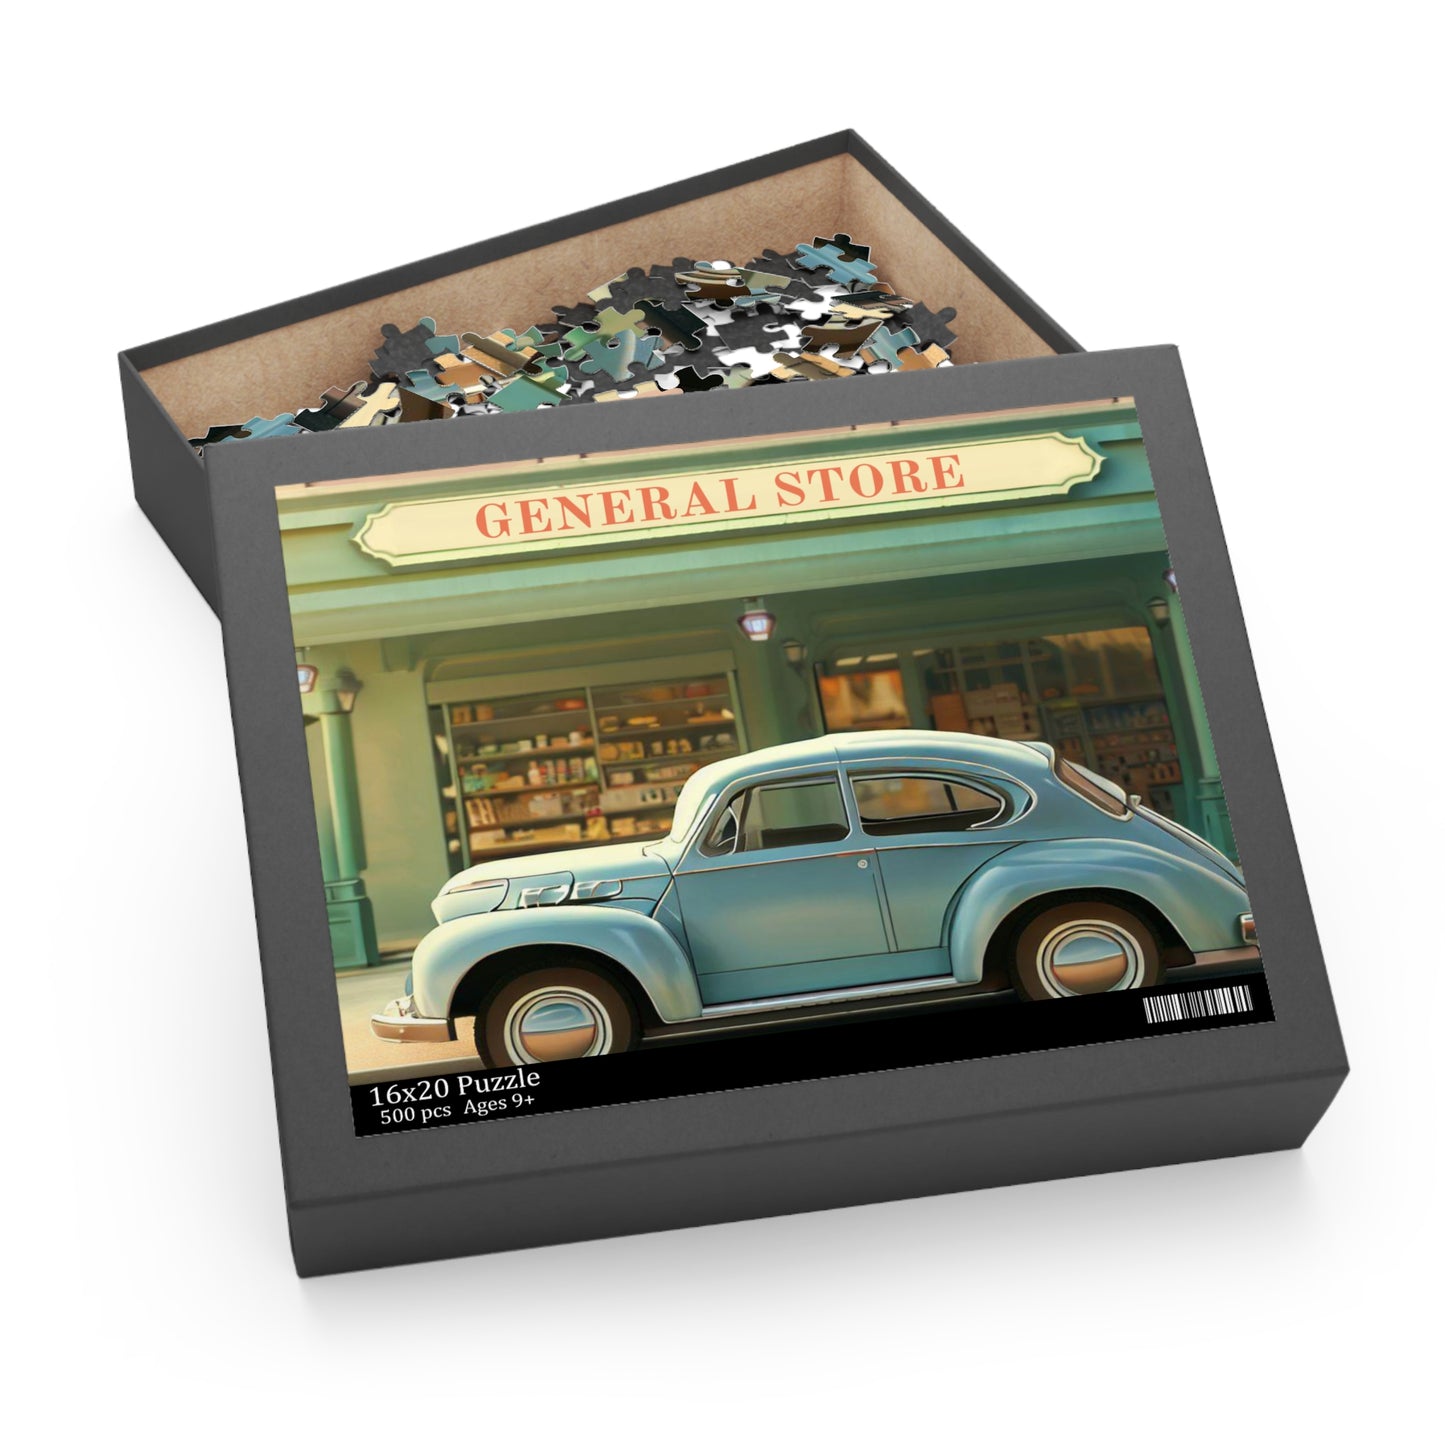 Retro General Store Front Jigsaw Puzzle 500-Piece